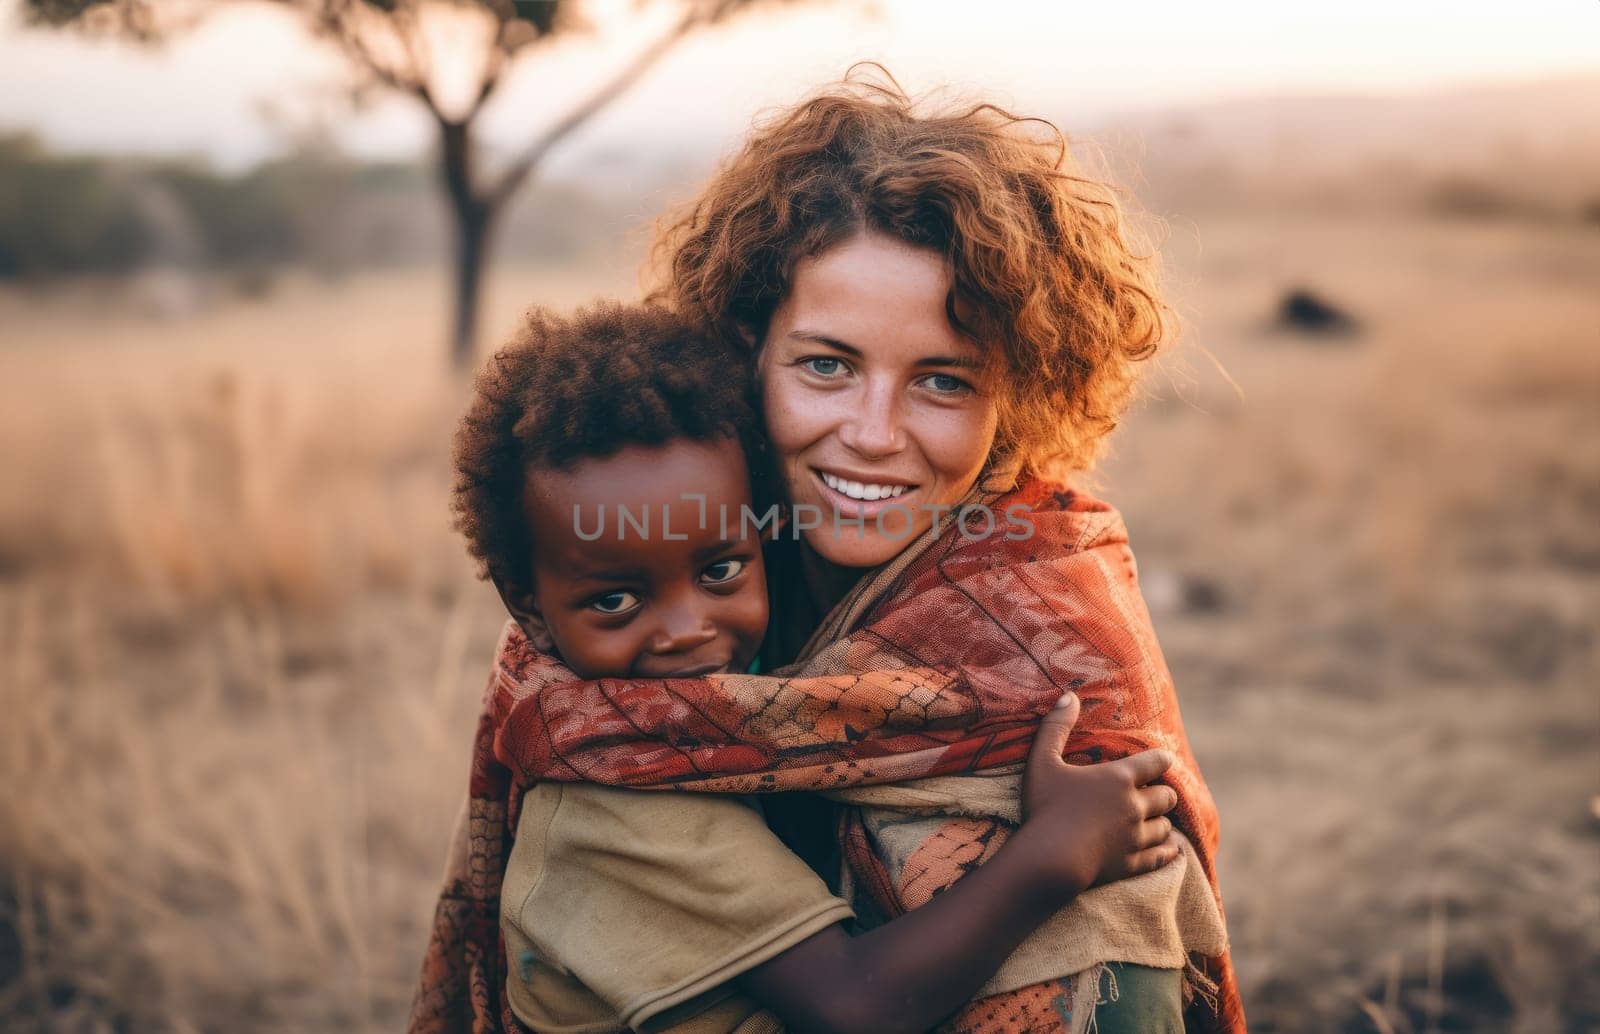 Cross-Cultural Compassion.European Volunteer Embraces African-American Child in African Desert.Generated image by dotshock